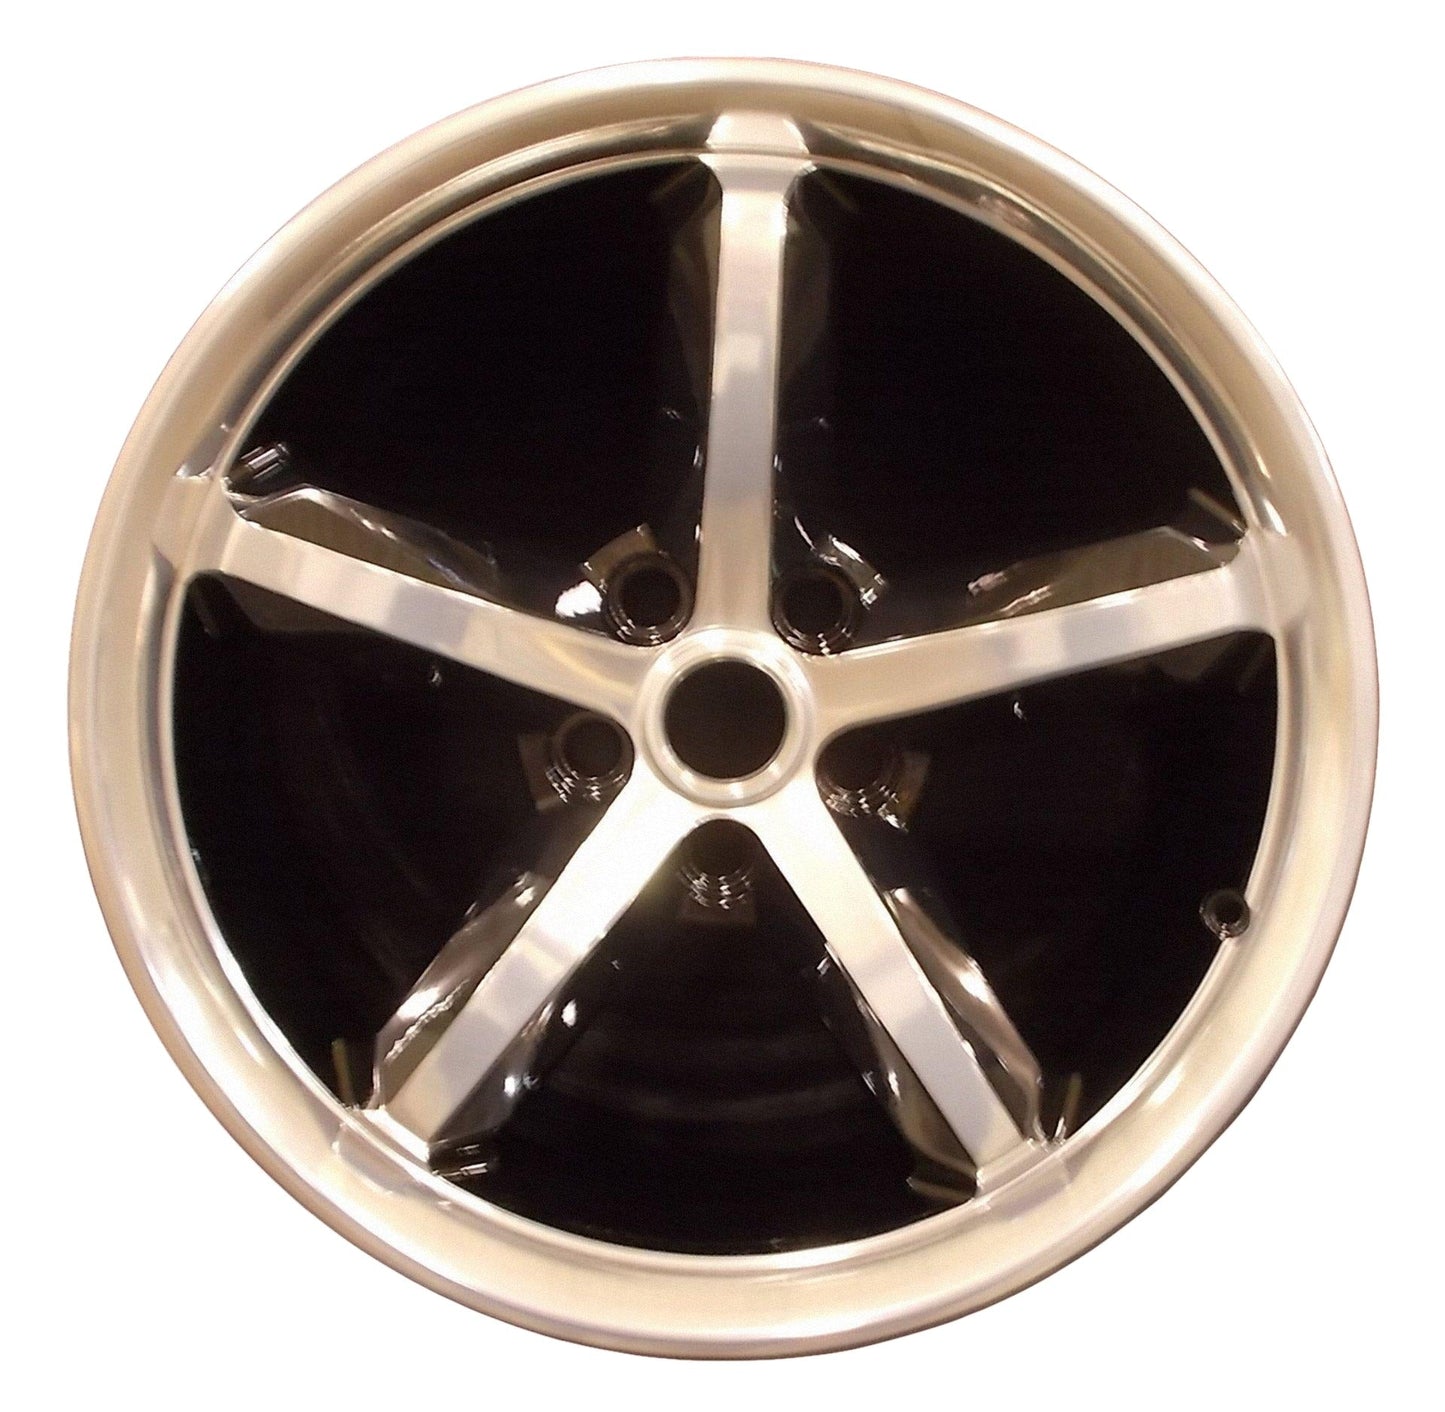 Dodge Charger  2009, 2010, 2011, 2012 Factory OEM Car Wheel Size 18x7.5 Alloy WAO.2423.LB01.POL